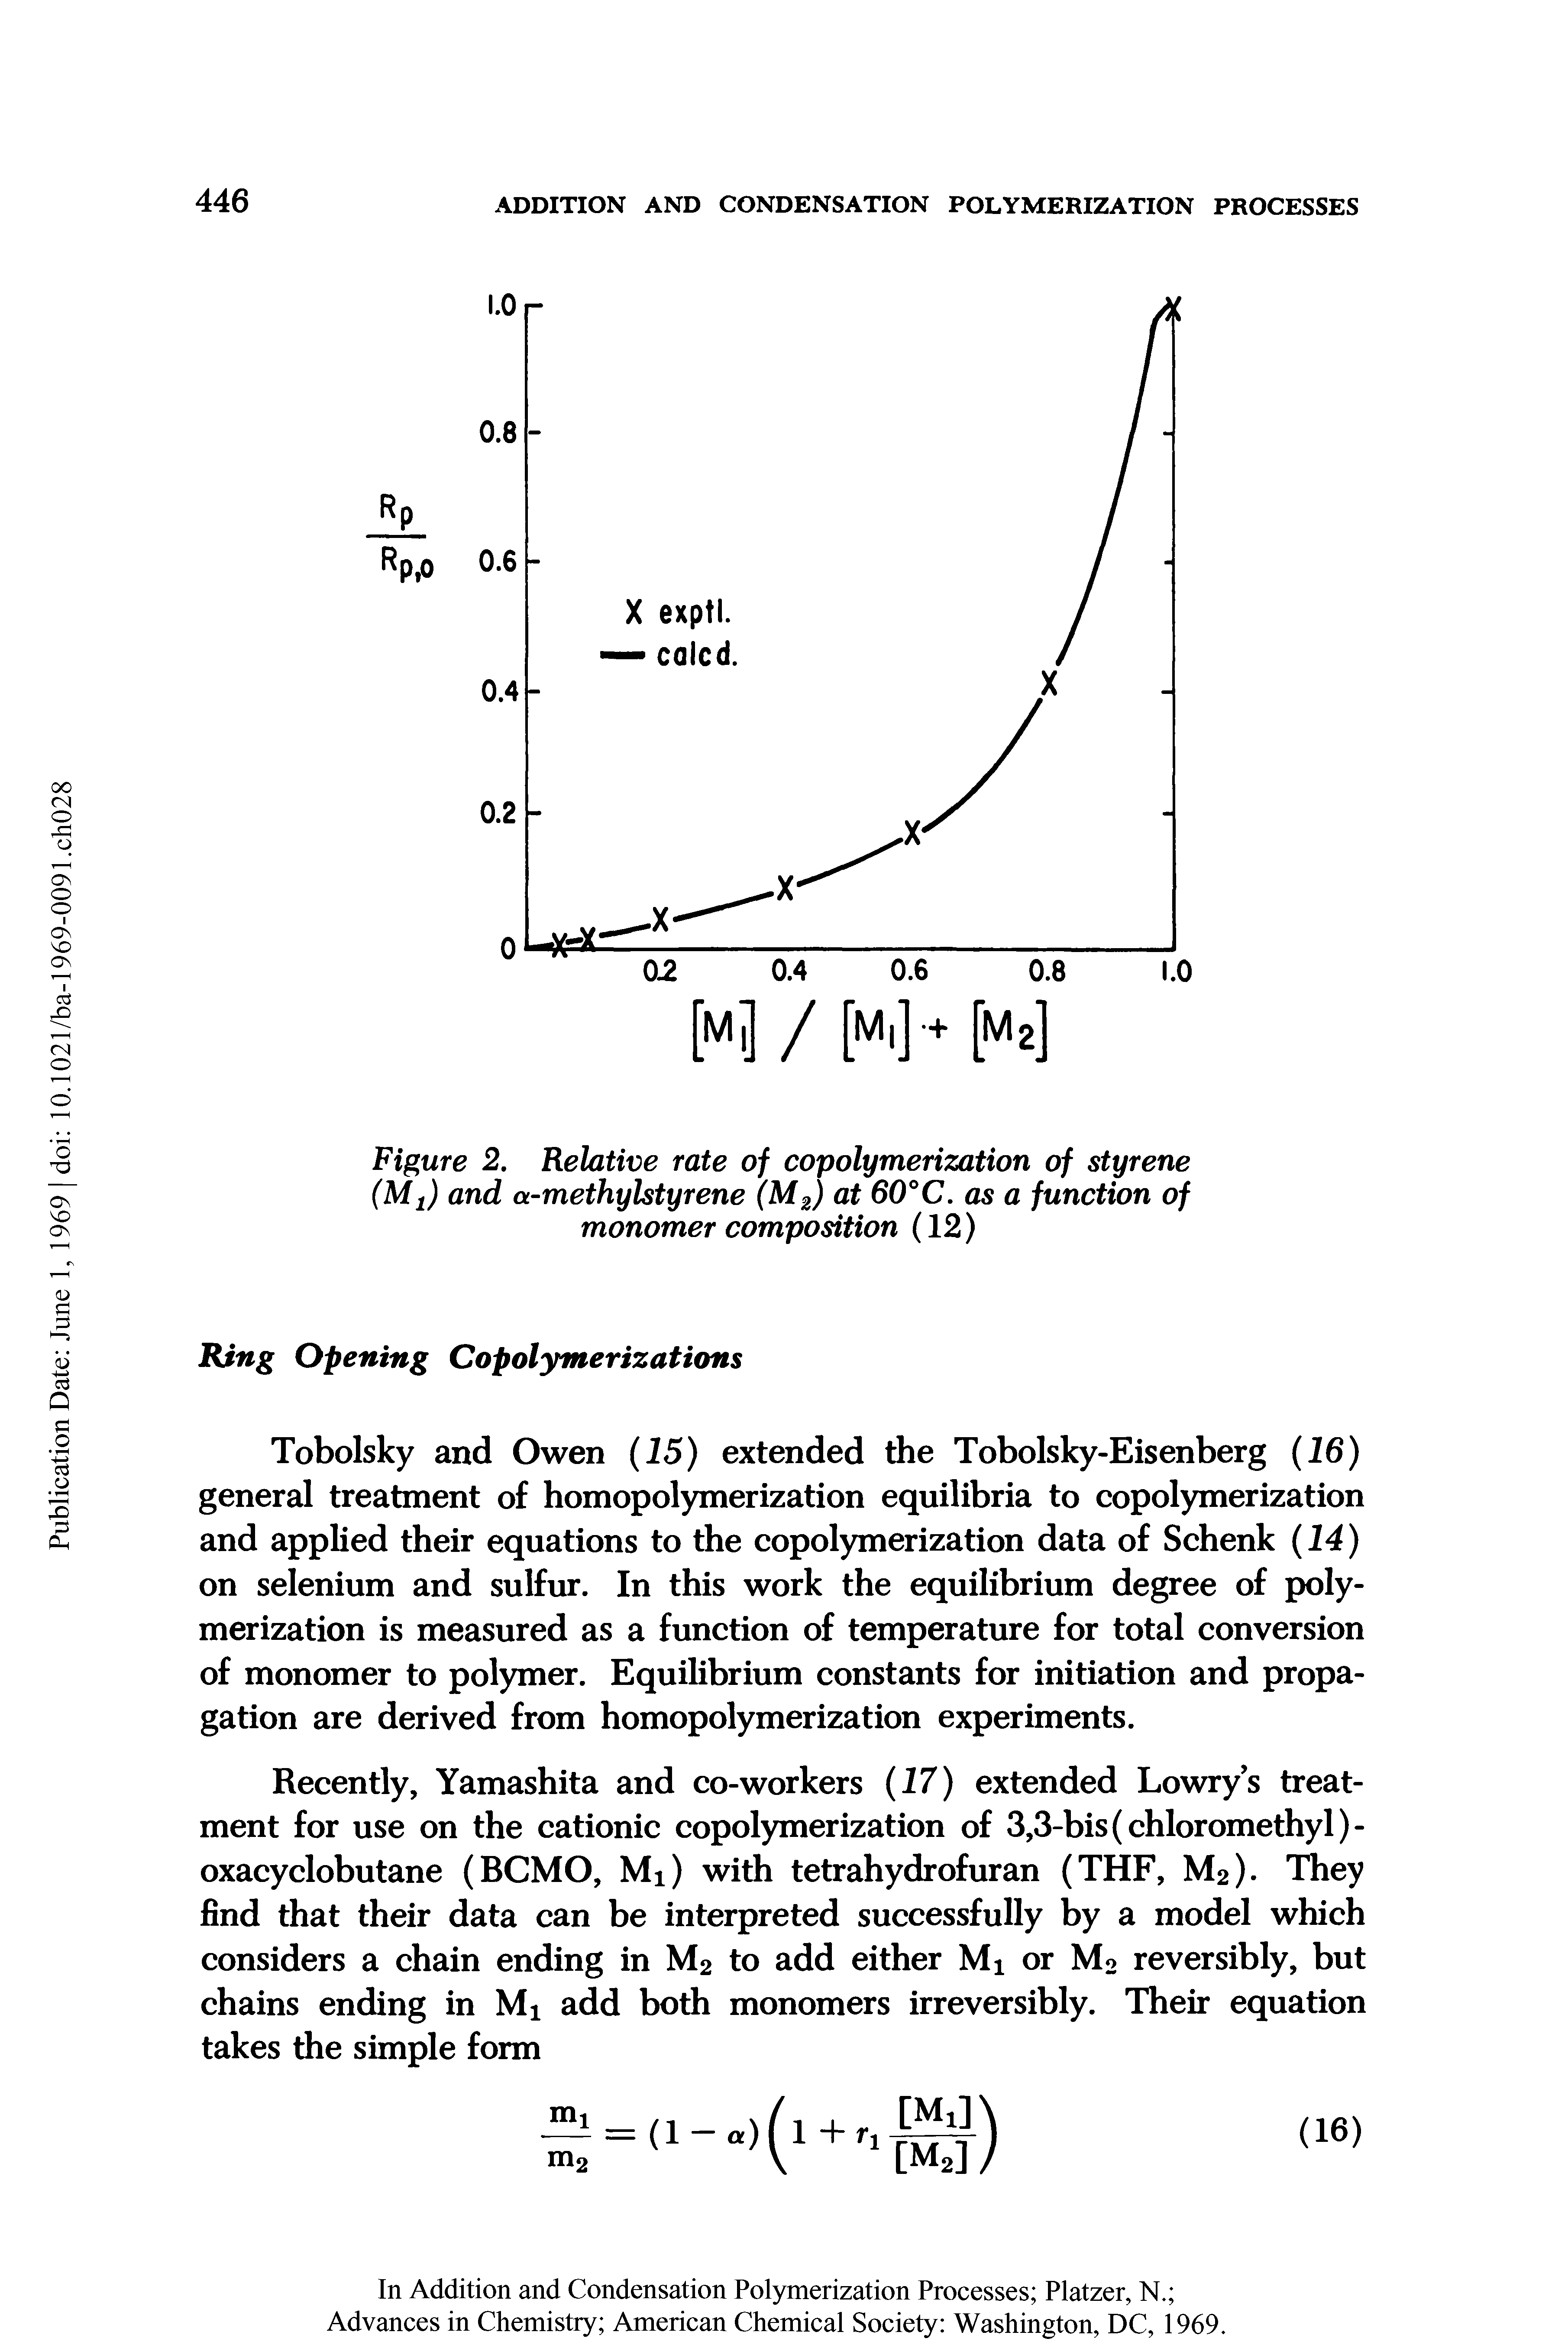 Figure 2. Relative rate of copolymerization of styrene (Mj) and a-methylstyrene (M2) at 60°C. as a function of monomer composition (12)...